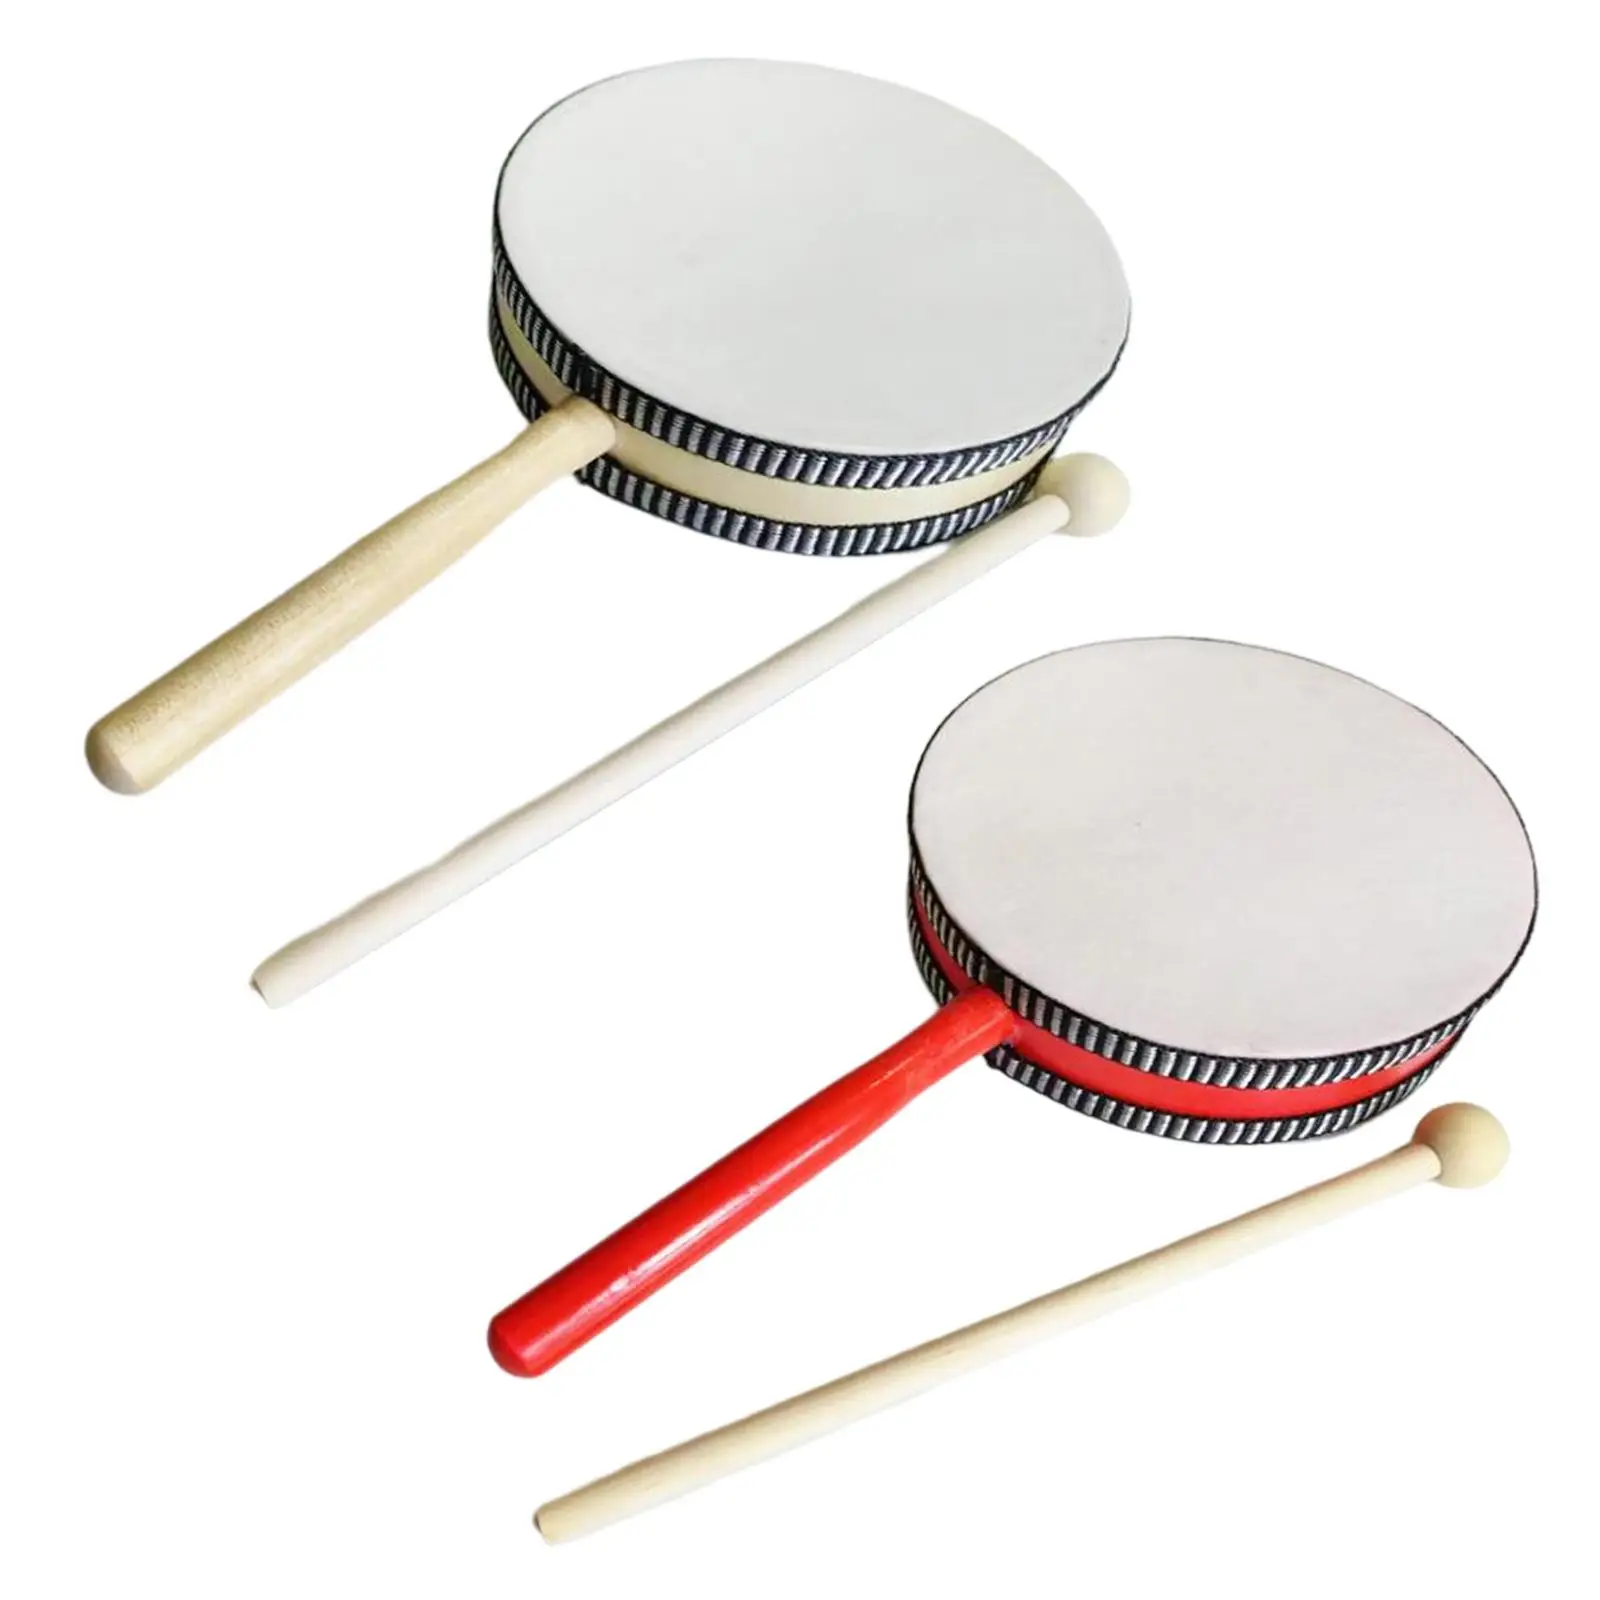 6 inch Kids Drum Hand Drum Toy for Party Supplies Birthday Gifts School